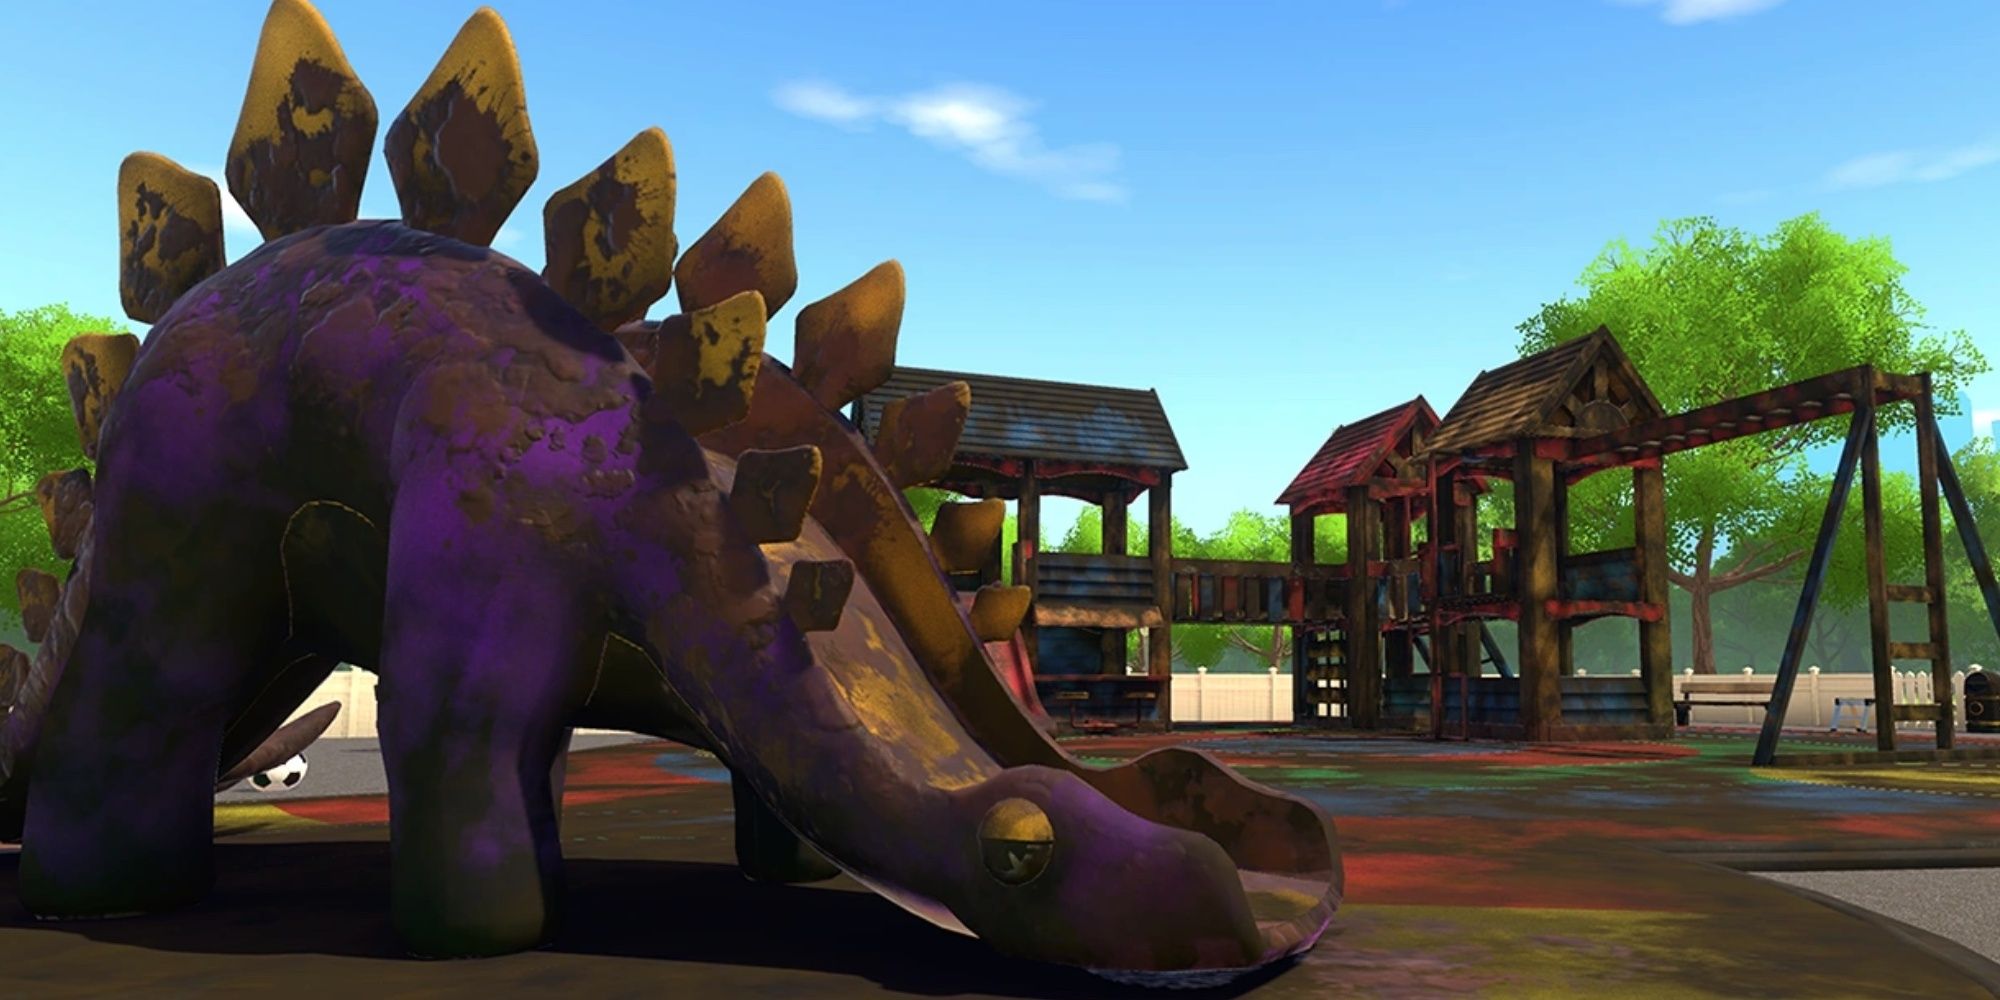 A dirty purple dinosaur at rest in The Playground.